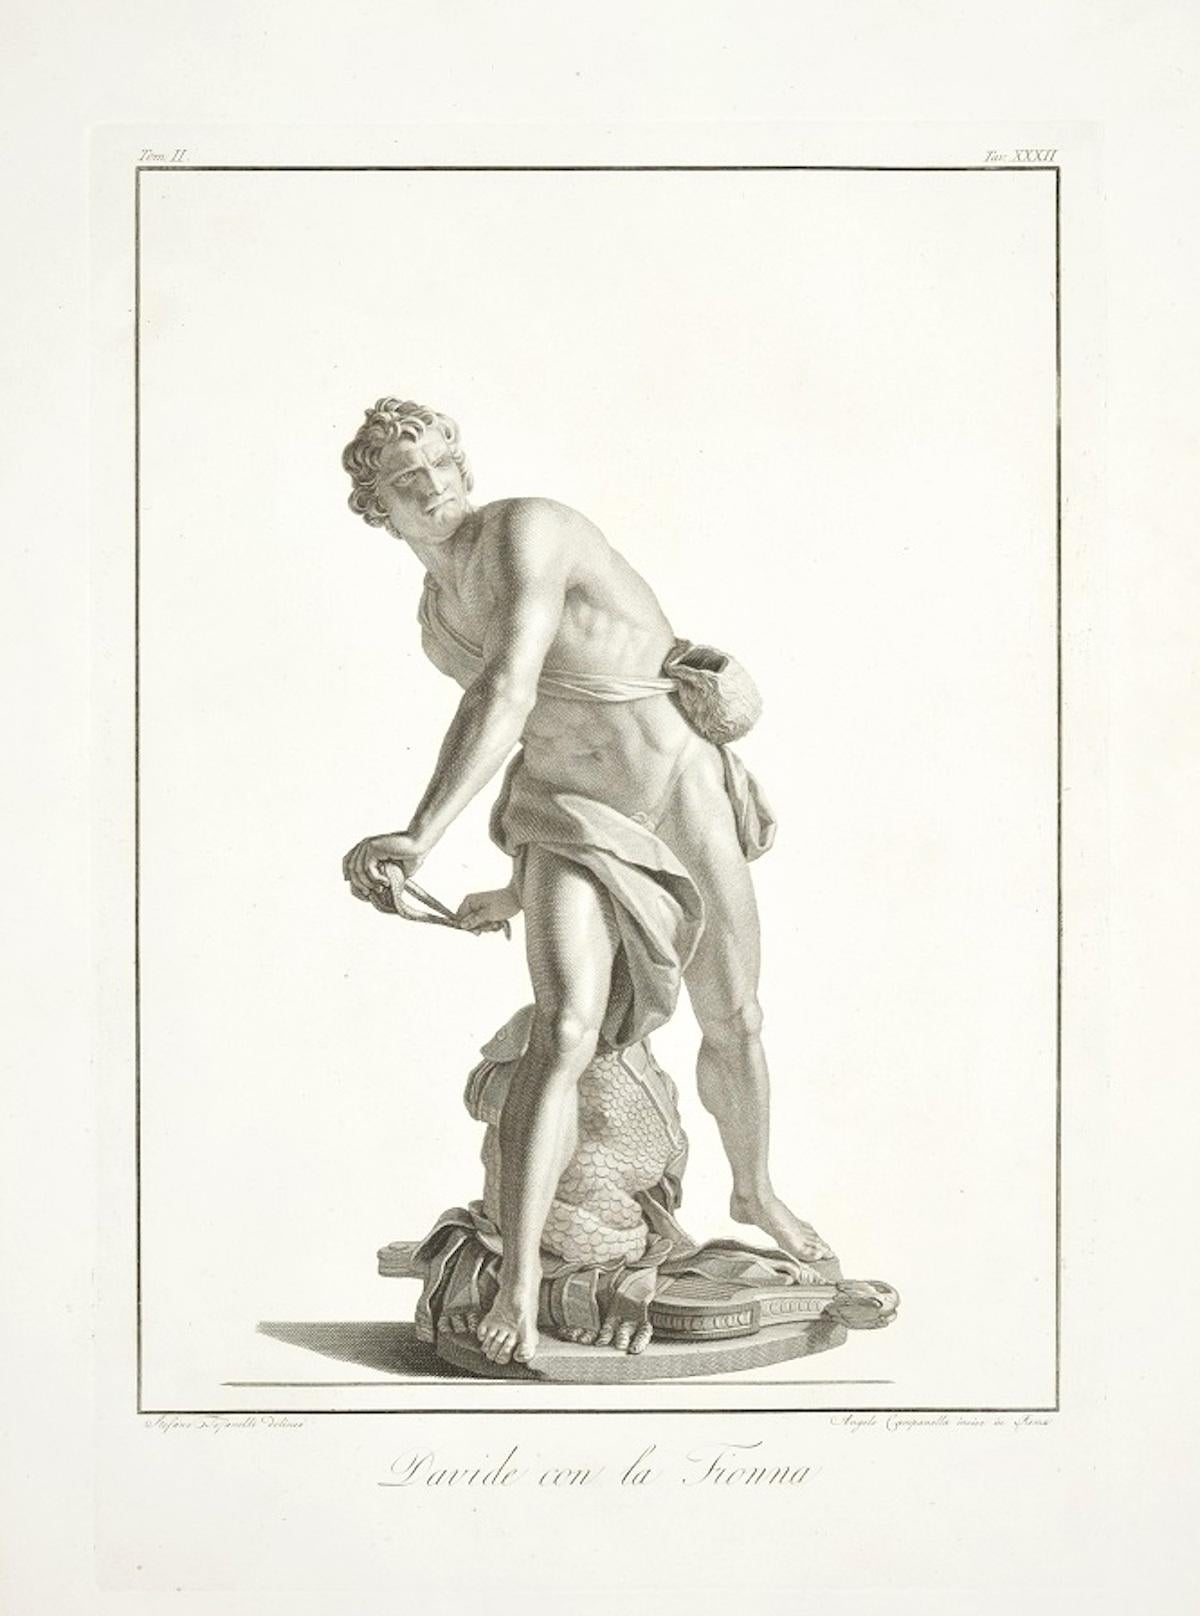 Pietro Fontana Figurative Print - David with the Sling - Etching by A. Campanella After S. Tofanelli - 1821